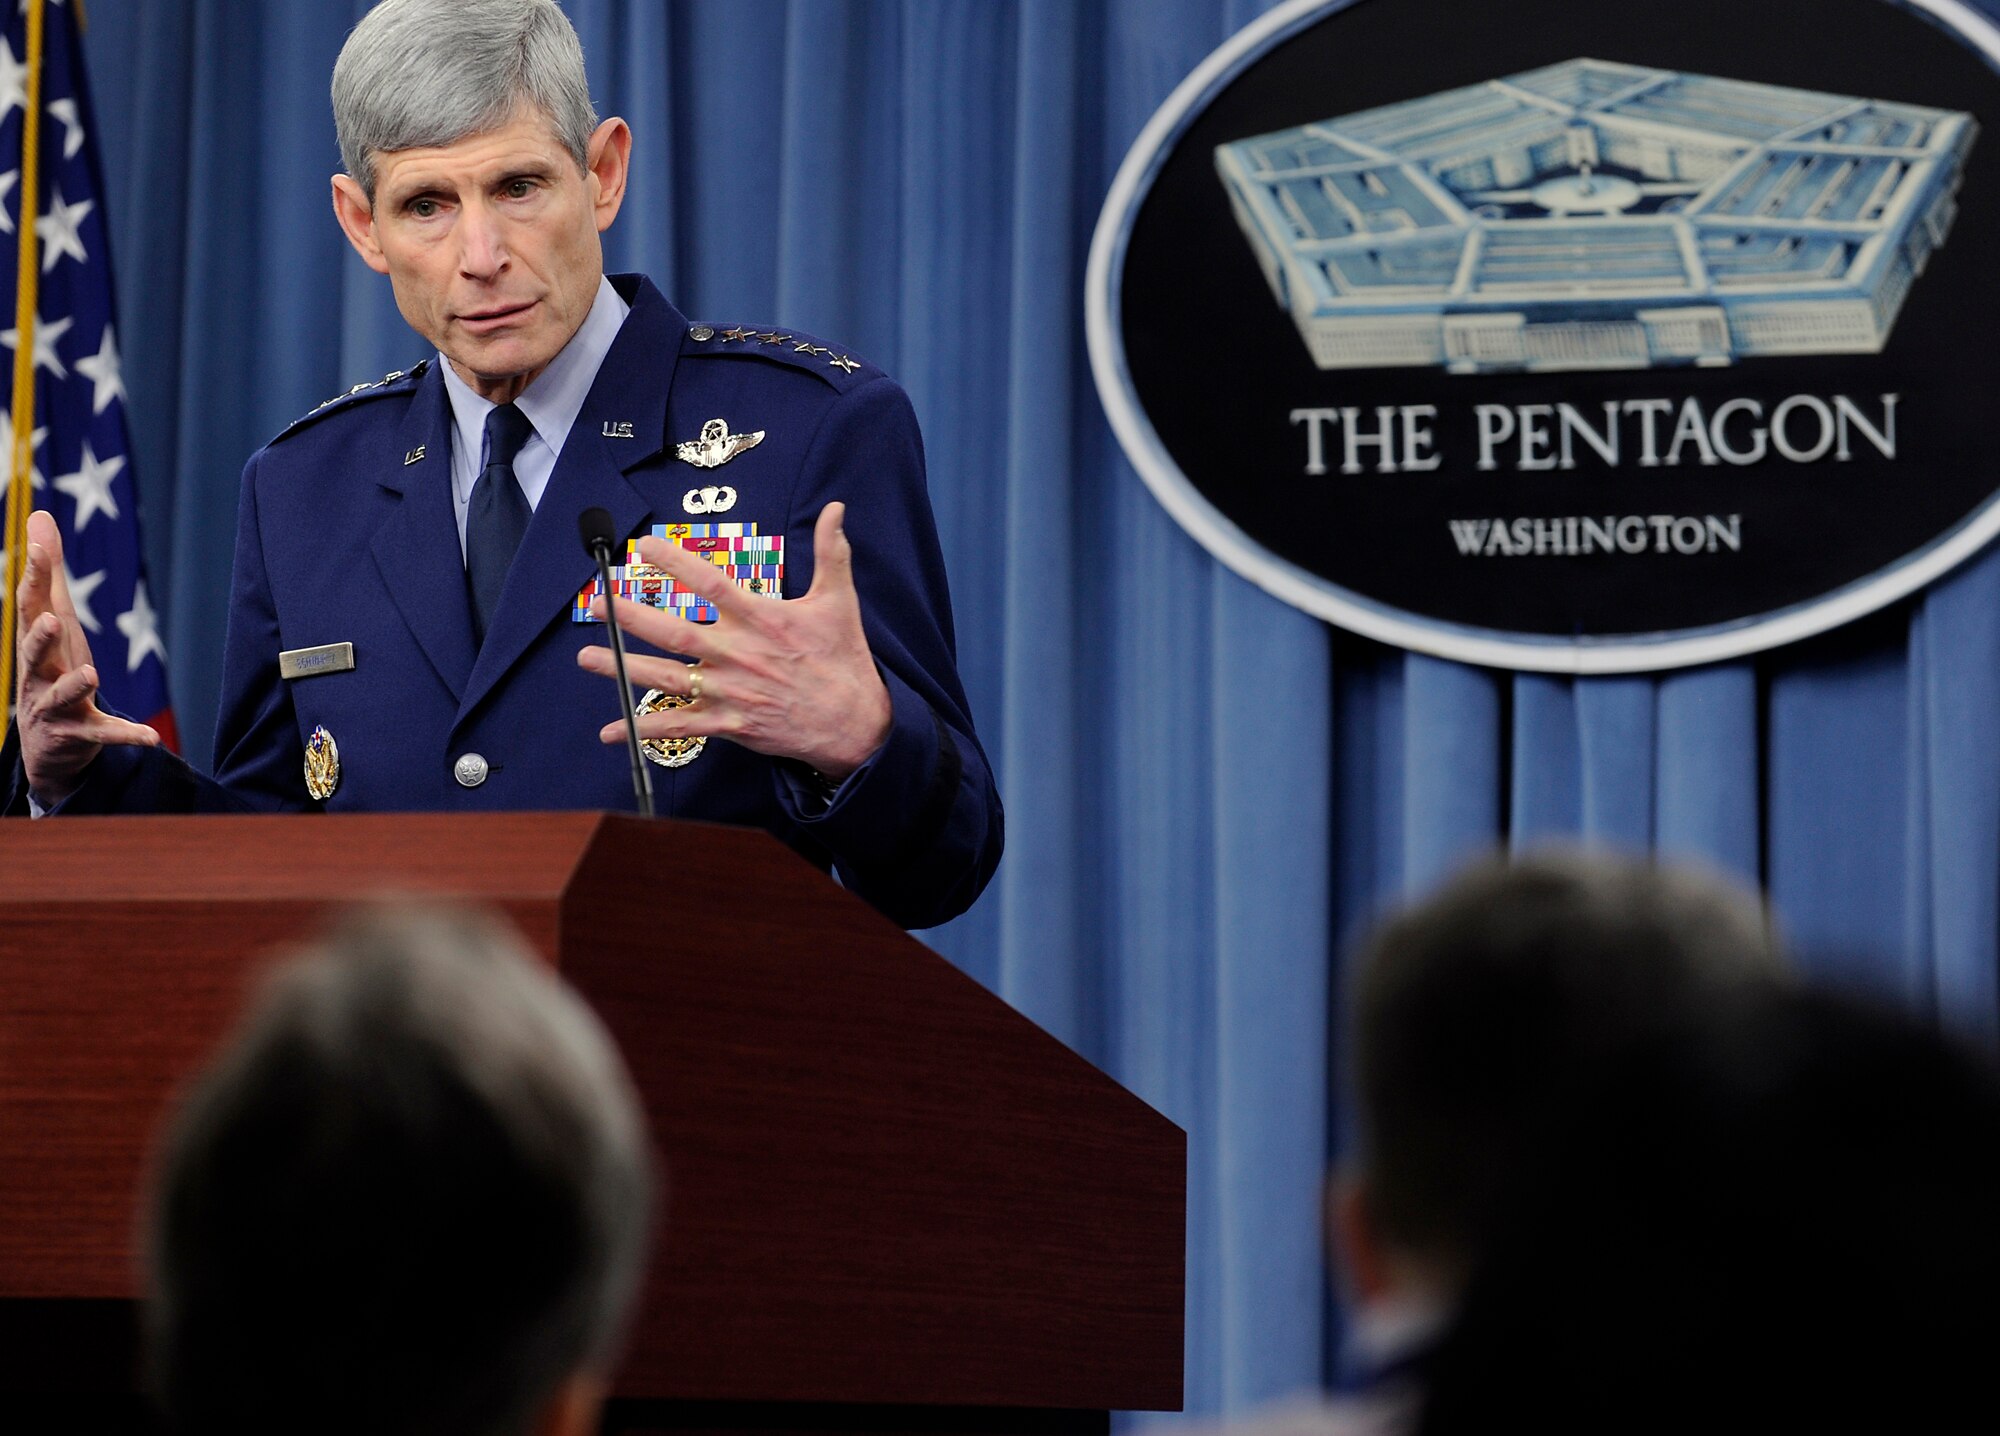 Air Force Chief of Staff Gen. Norton Schwartz delivers comments about the new defense strategy to members of the media in the Pentagon on Jan. 27, 2012.  Throughout the ongoing budget process, Schwartz said, the Air Force will remain committed to its ongoing responsibilities to provide globally-postured, regionally-tailorable, full-spectrum airpower. (U.S. Air Force photo/Scott M. Ash)